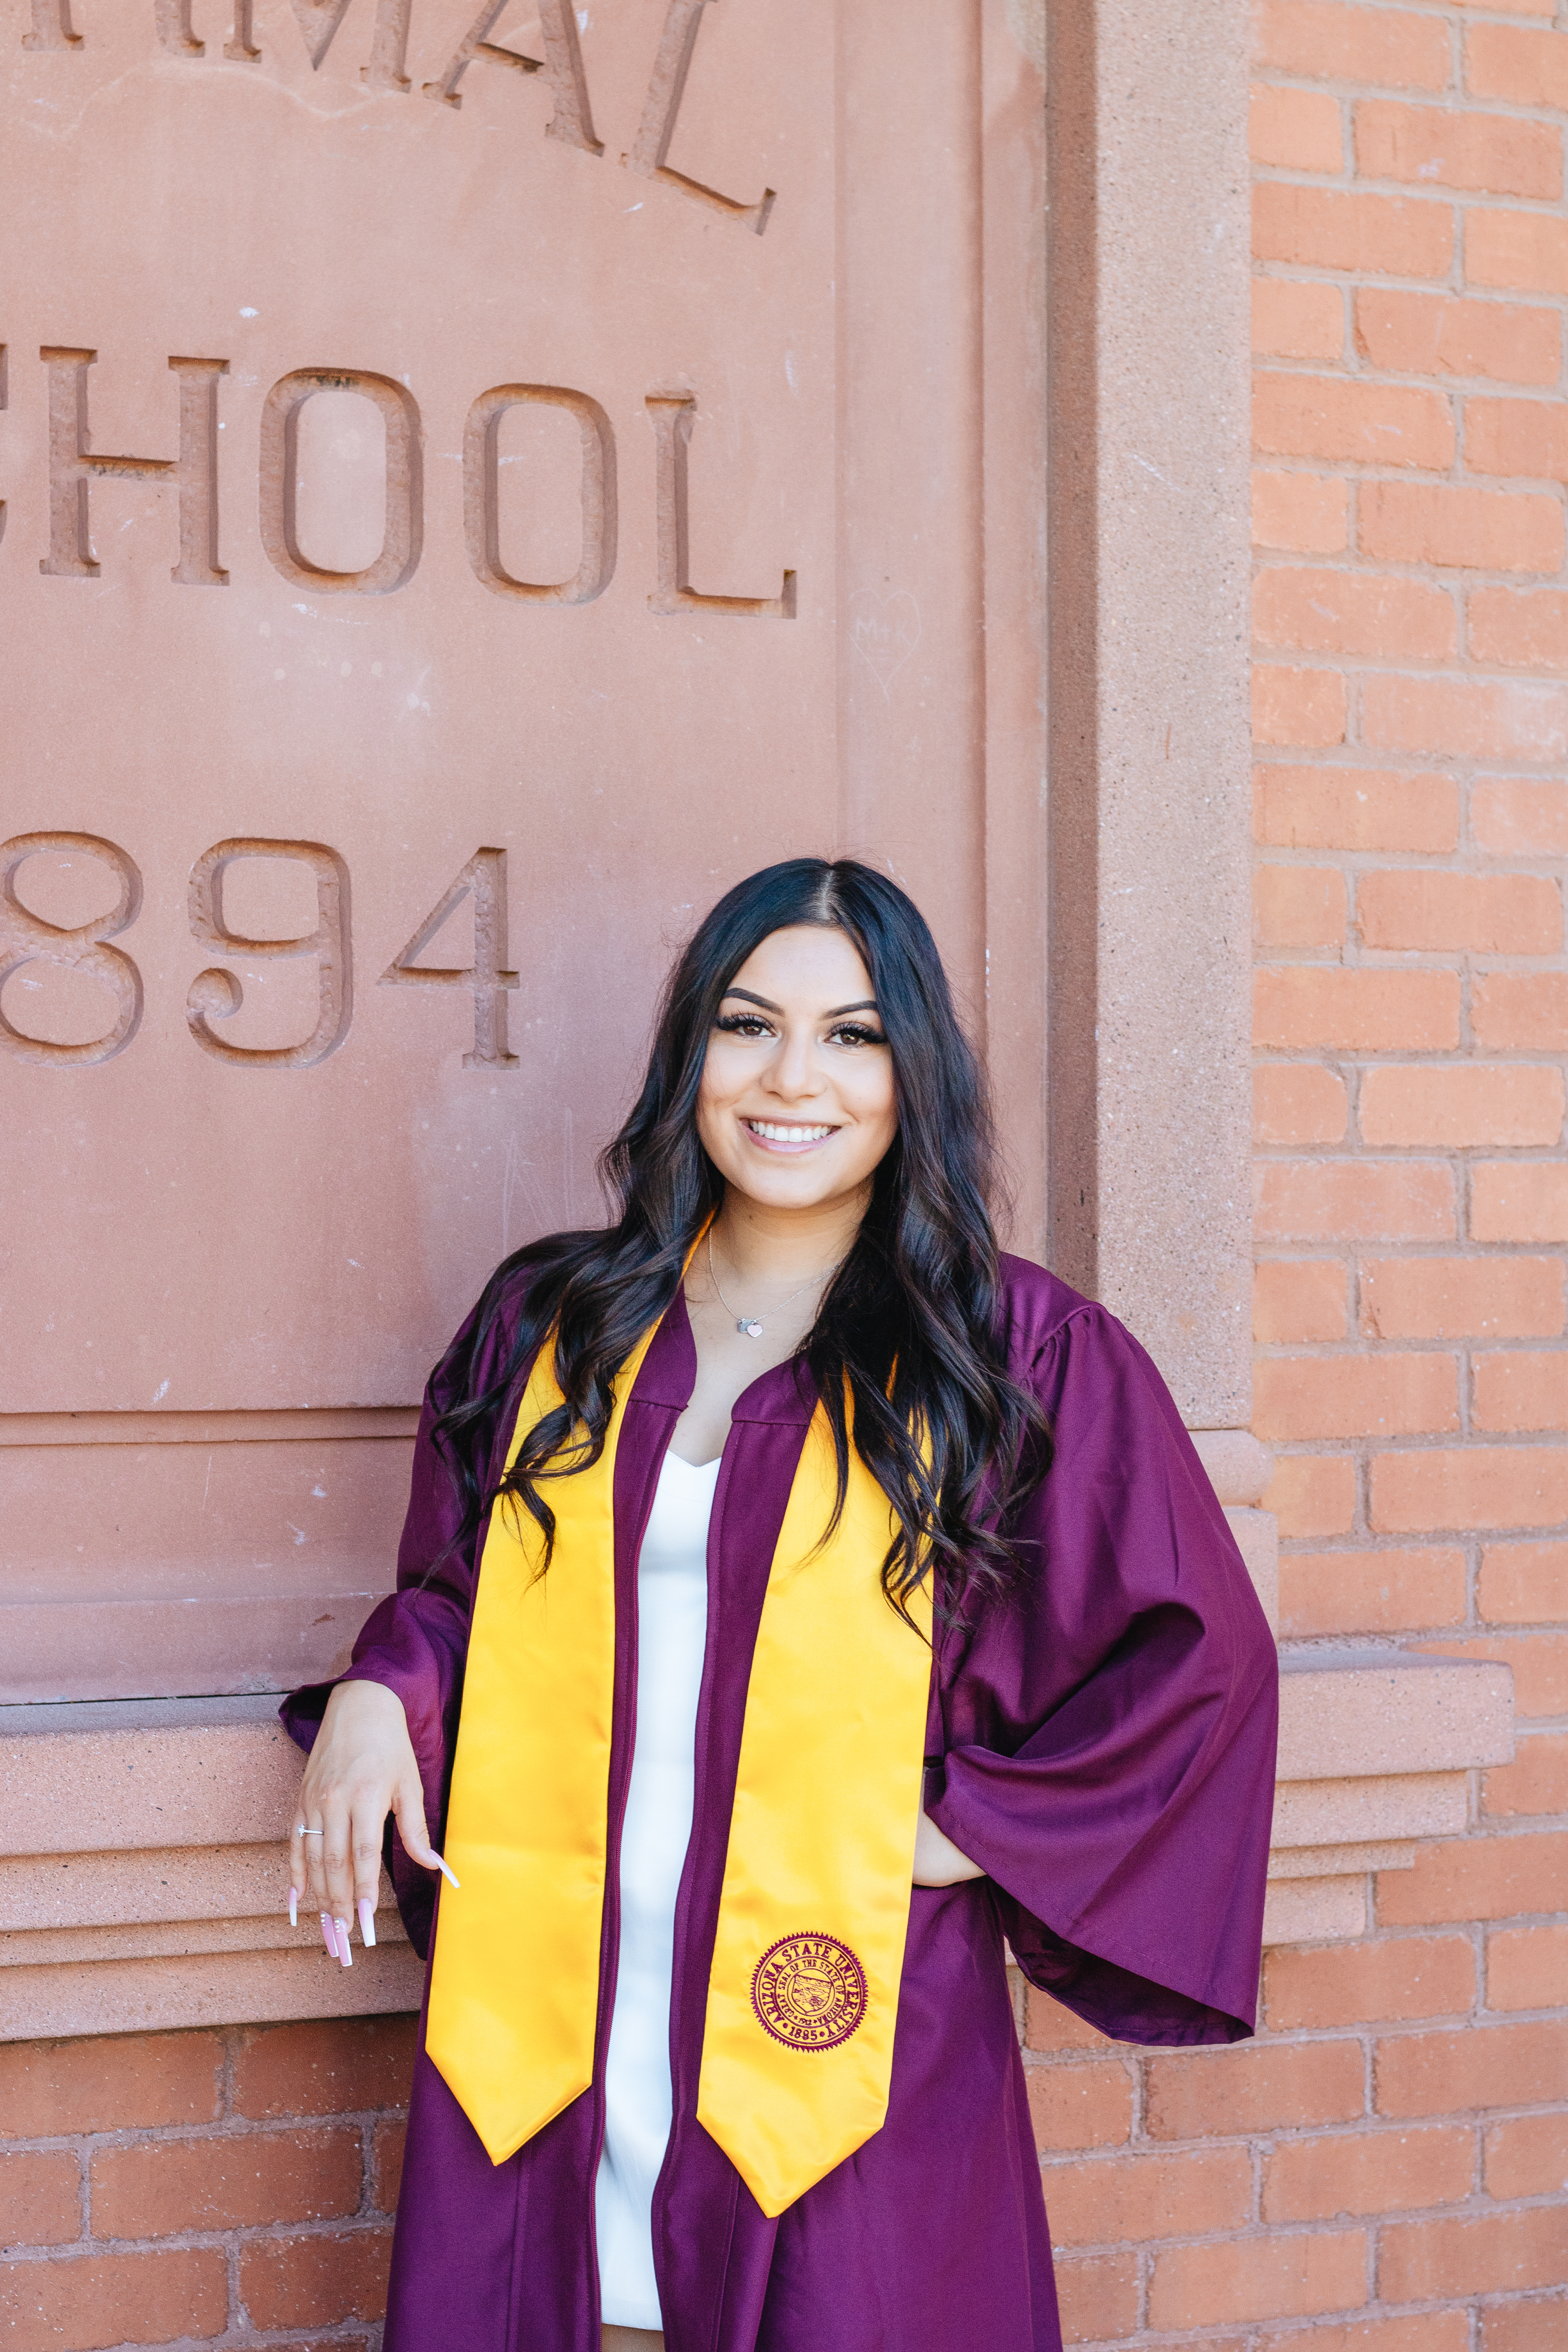  ASU grad Natalie Carranza smiles in her graduation gown in front of Old Main.